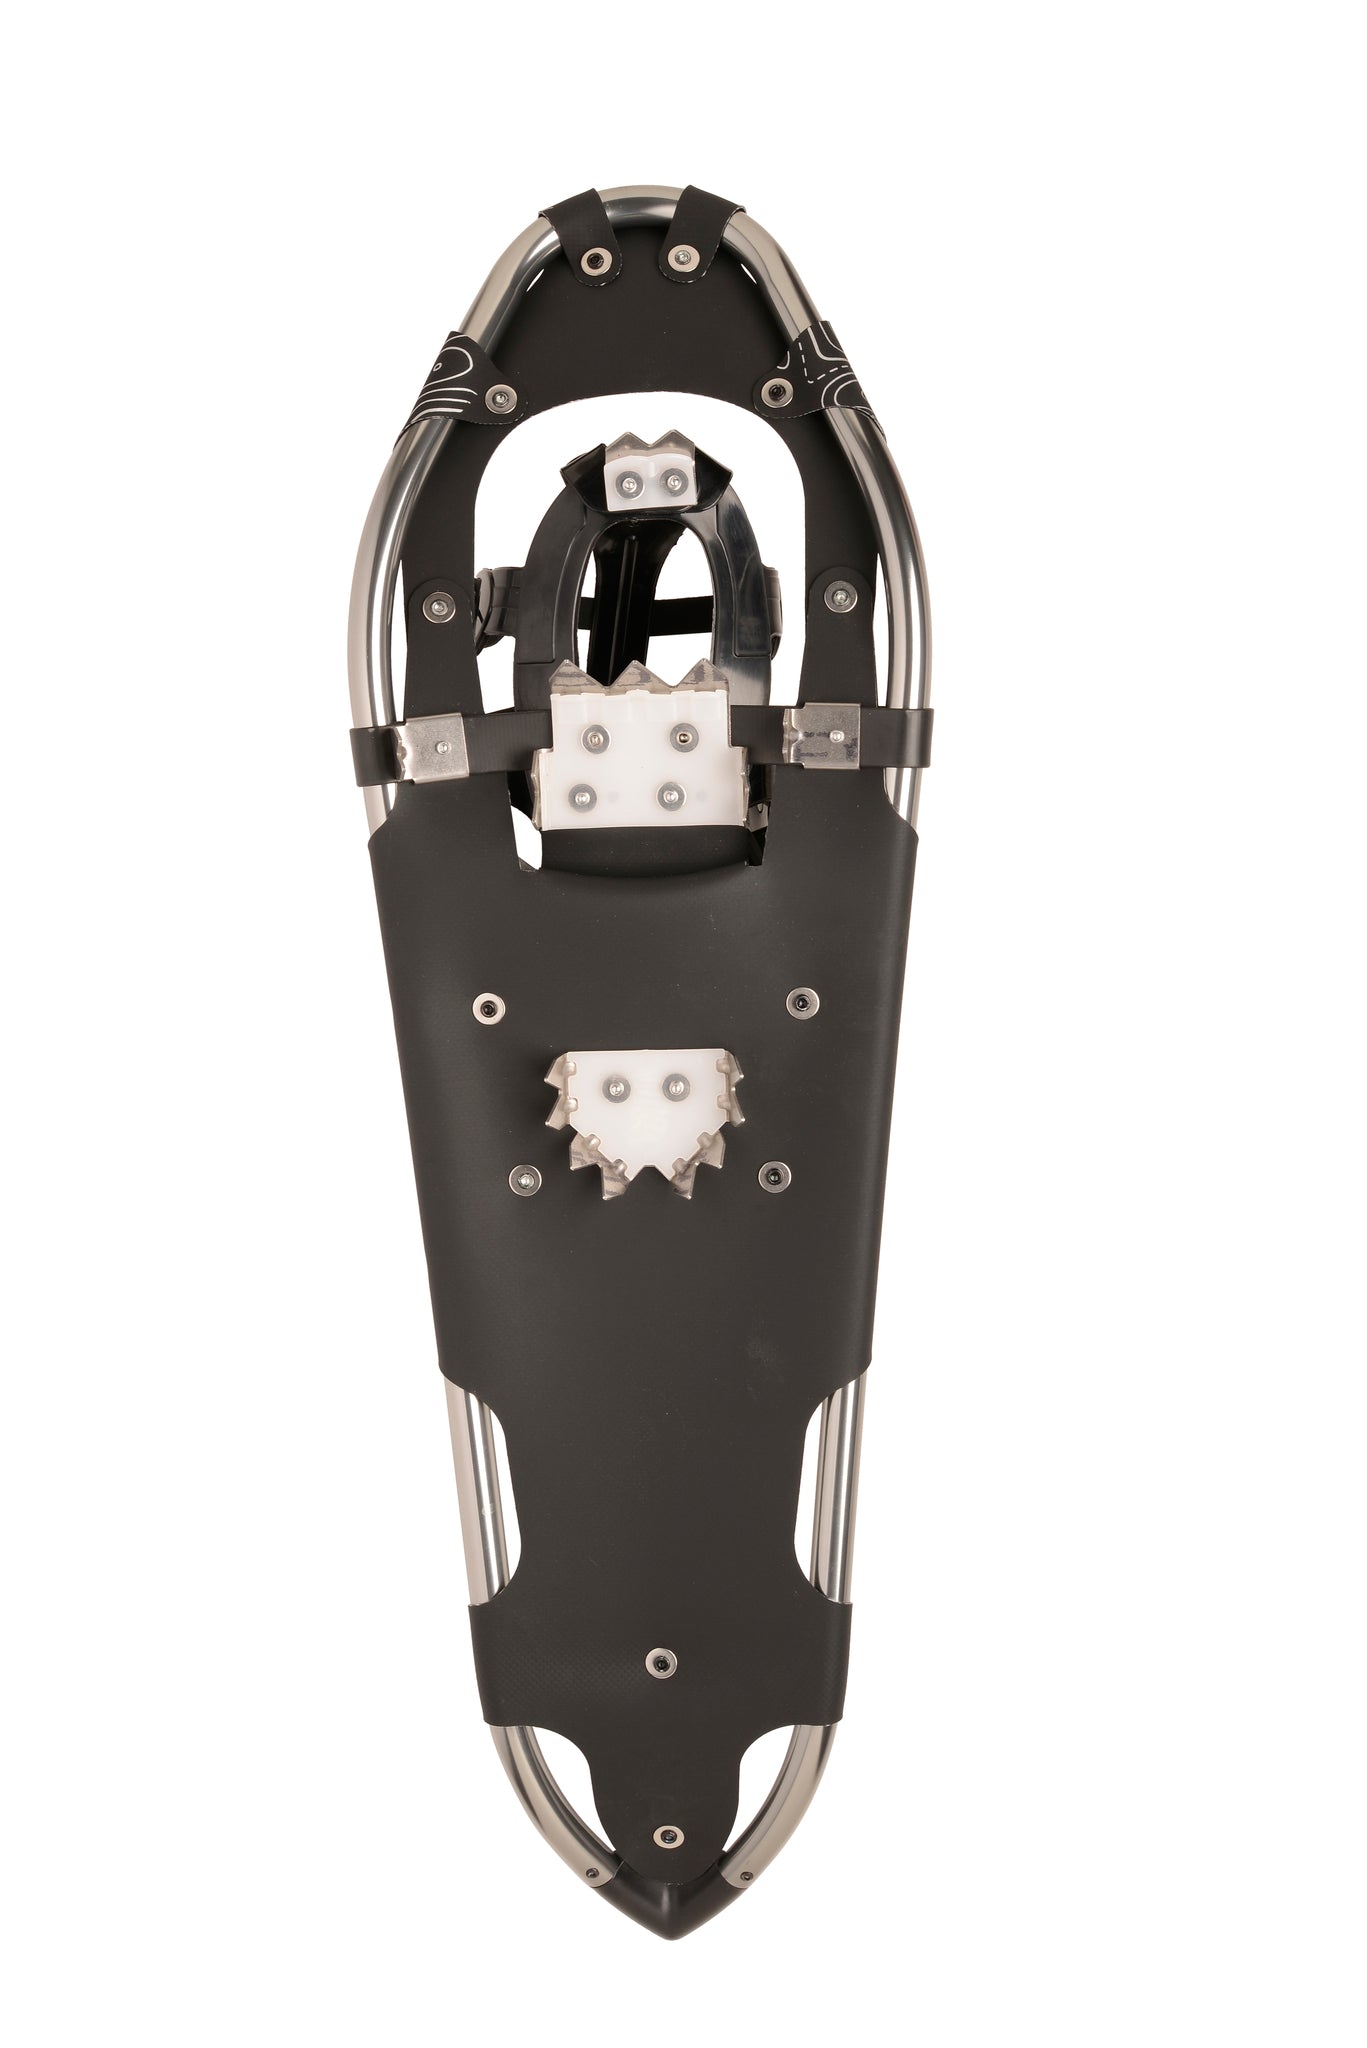 Crescent Moon Gold 10 Silver Snowshoes - Winter 2021/2022